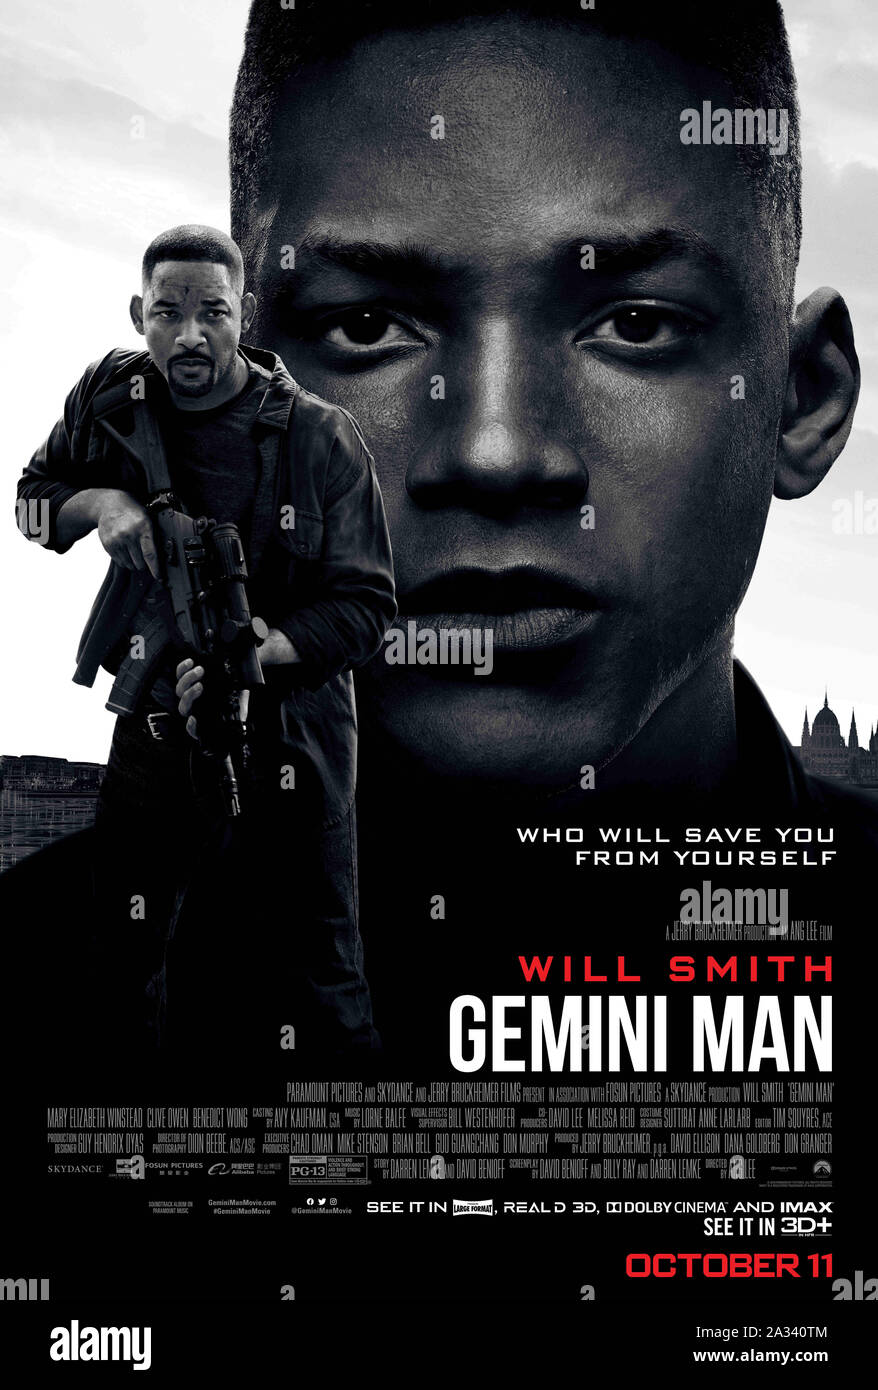 RELEASE DATE: October 11, 2019 TITLE: Gemini Man STUDIO: Paramount Pictures DIRECTOR: Ang Lee PLOT: An over-the-hill hitman faces off against a younger clone of himself. STARRING: WILL SMITH as Henry Brogan / Junior. (Credit Image: © Paramount Pictures/Entertainment Pictures) Stock Photo